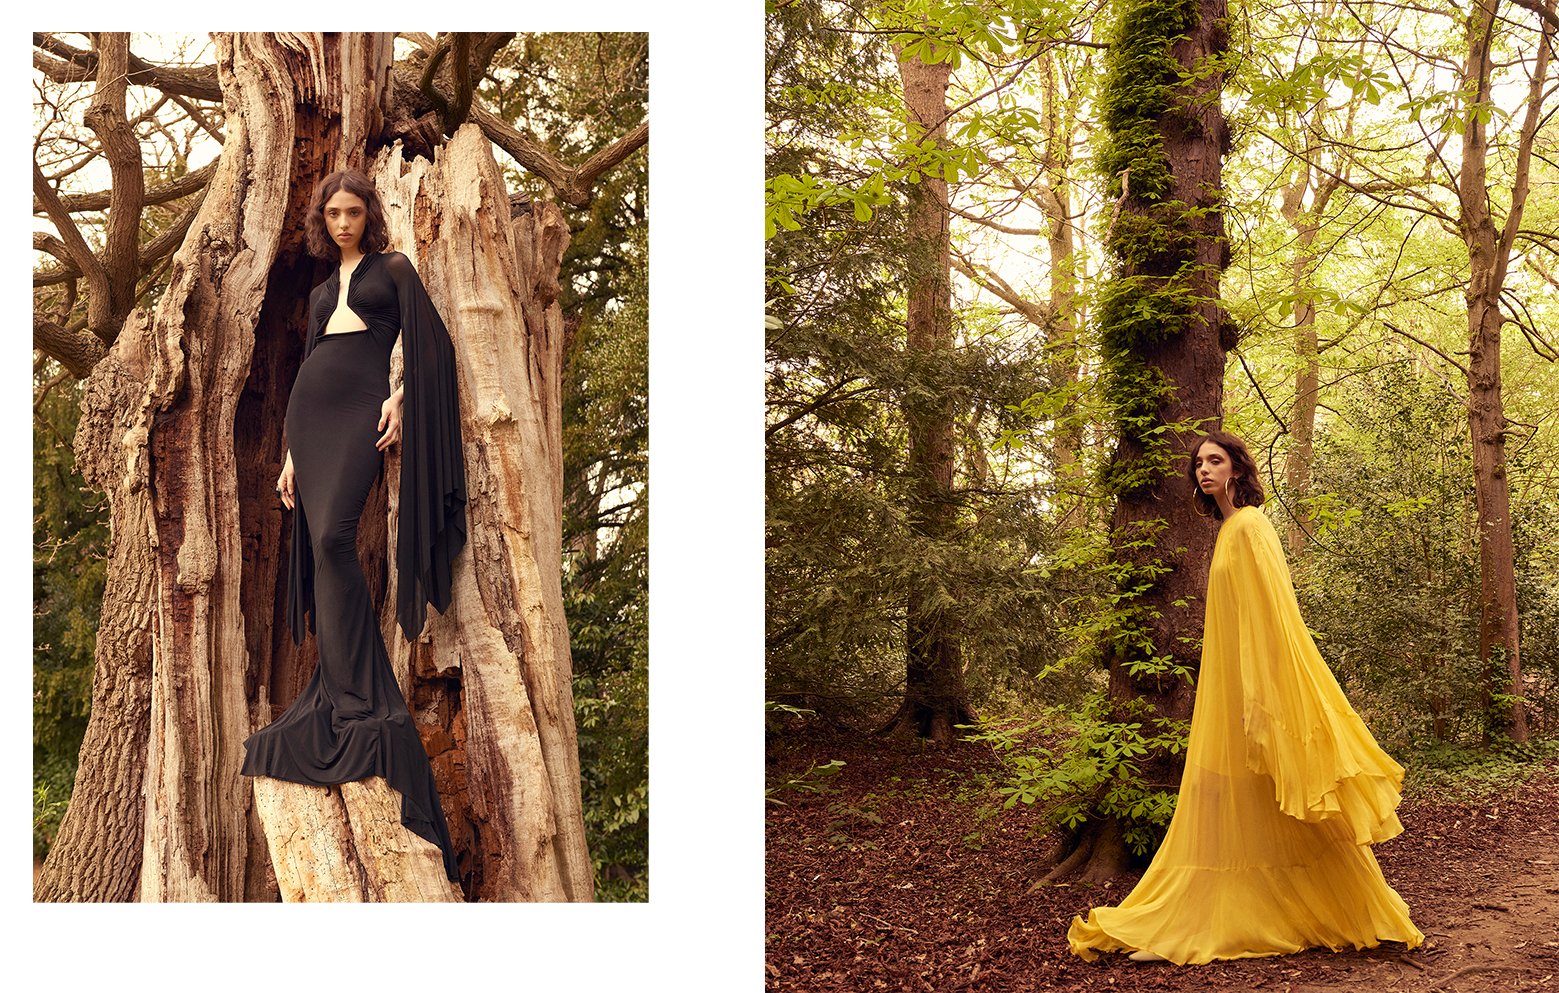  Lana Roost in the trees  Shot for Vogue Arabia   